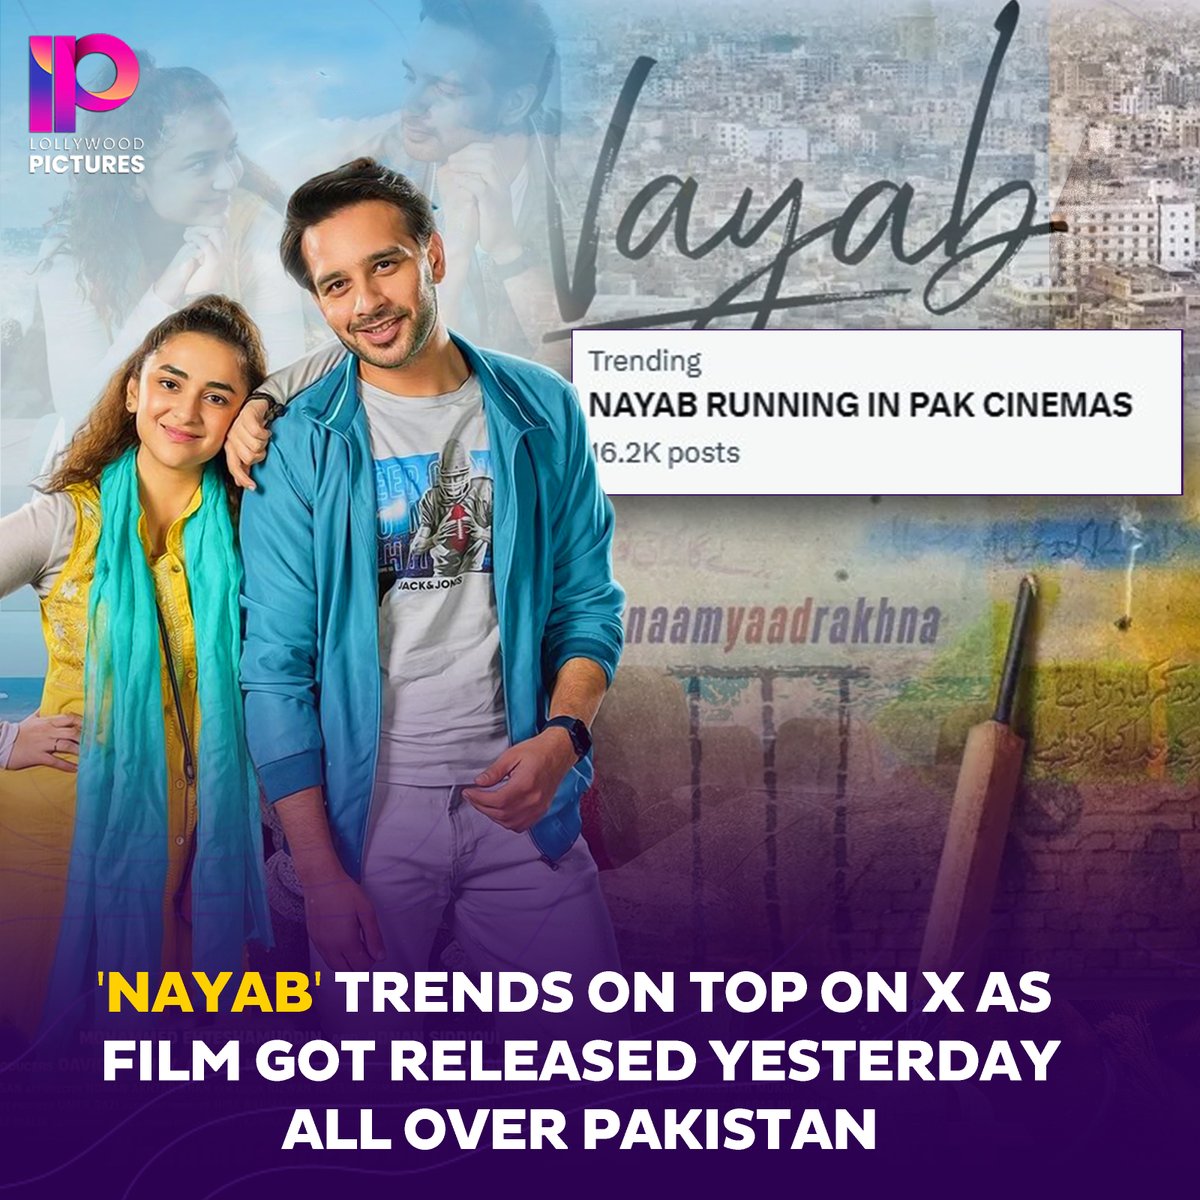 Nayab released in Cinemas all over Pakistan and becomes a top trend on X Twitter. 🔥🙌
#NayabThefiwas #YumnaZaidi #UsamaKhan #LollywoodPictures #LPEntertainment